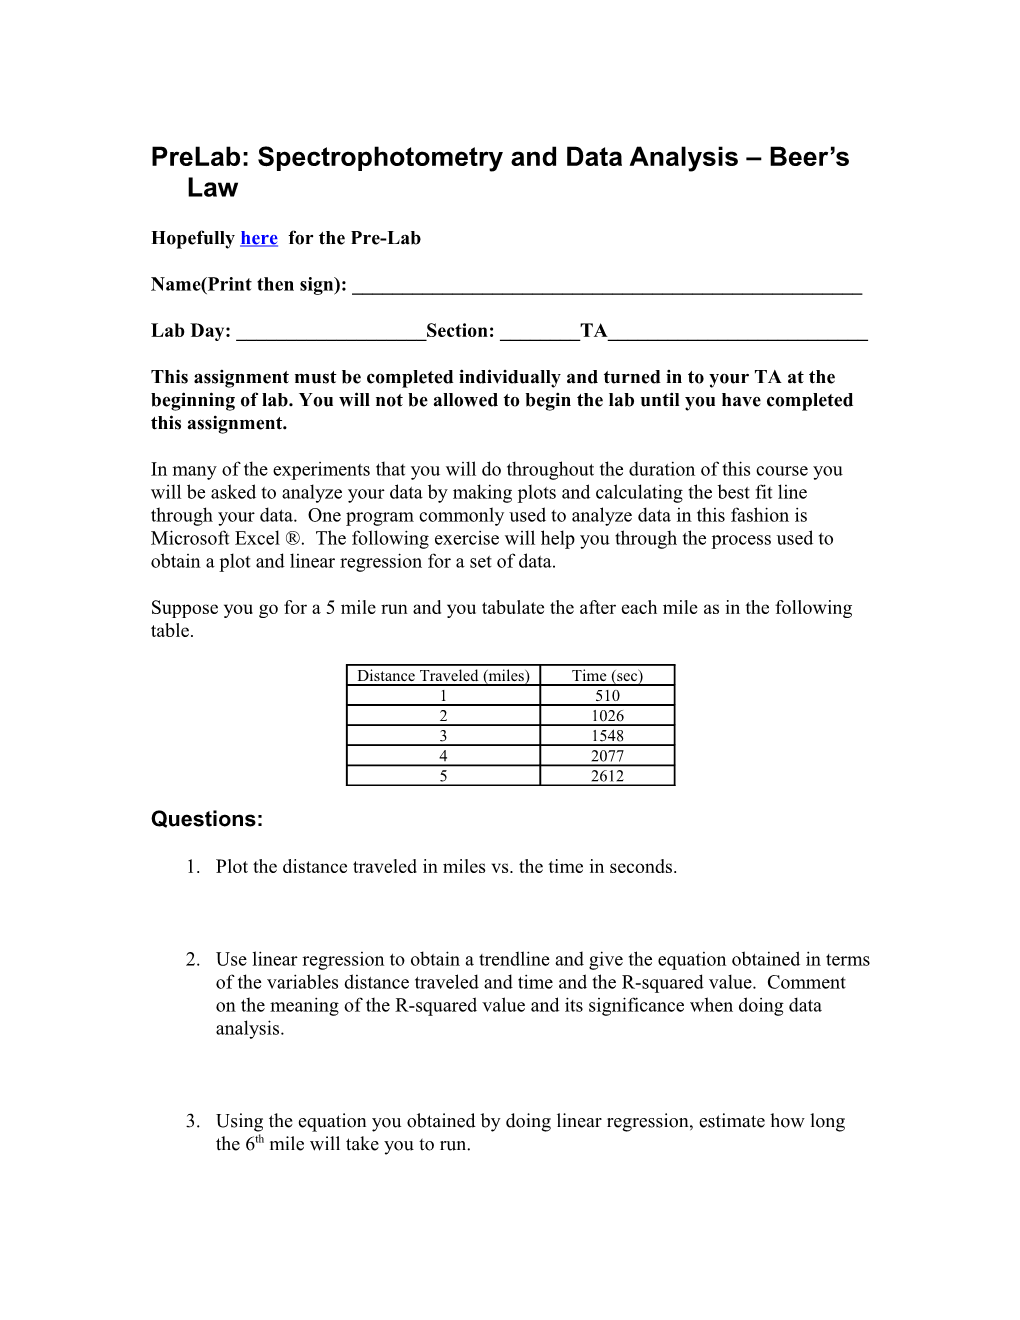 Prelab: Spectrophotometry and Data Analysis Beer S Law